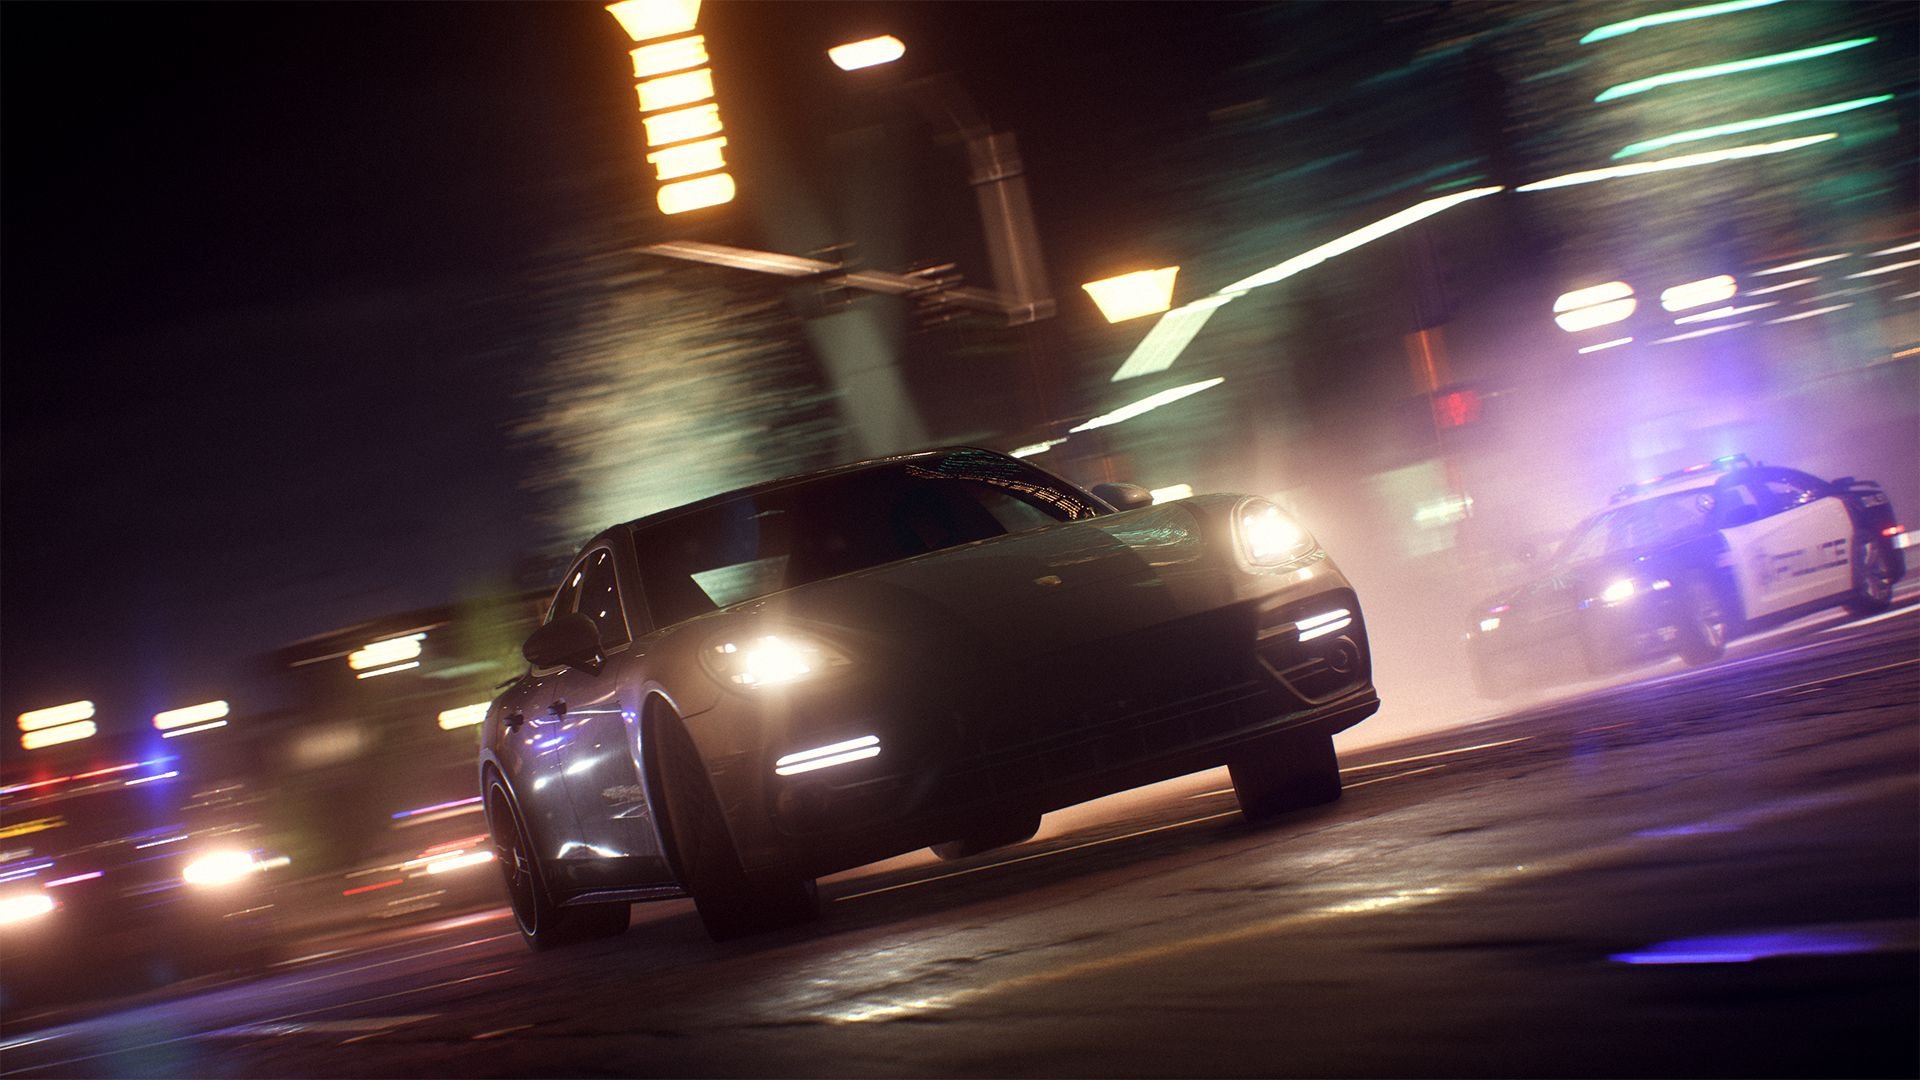 Another old screenshot of OG Fast and Furious Cars from NFS 2015